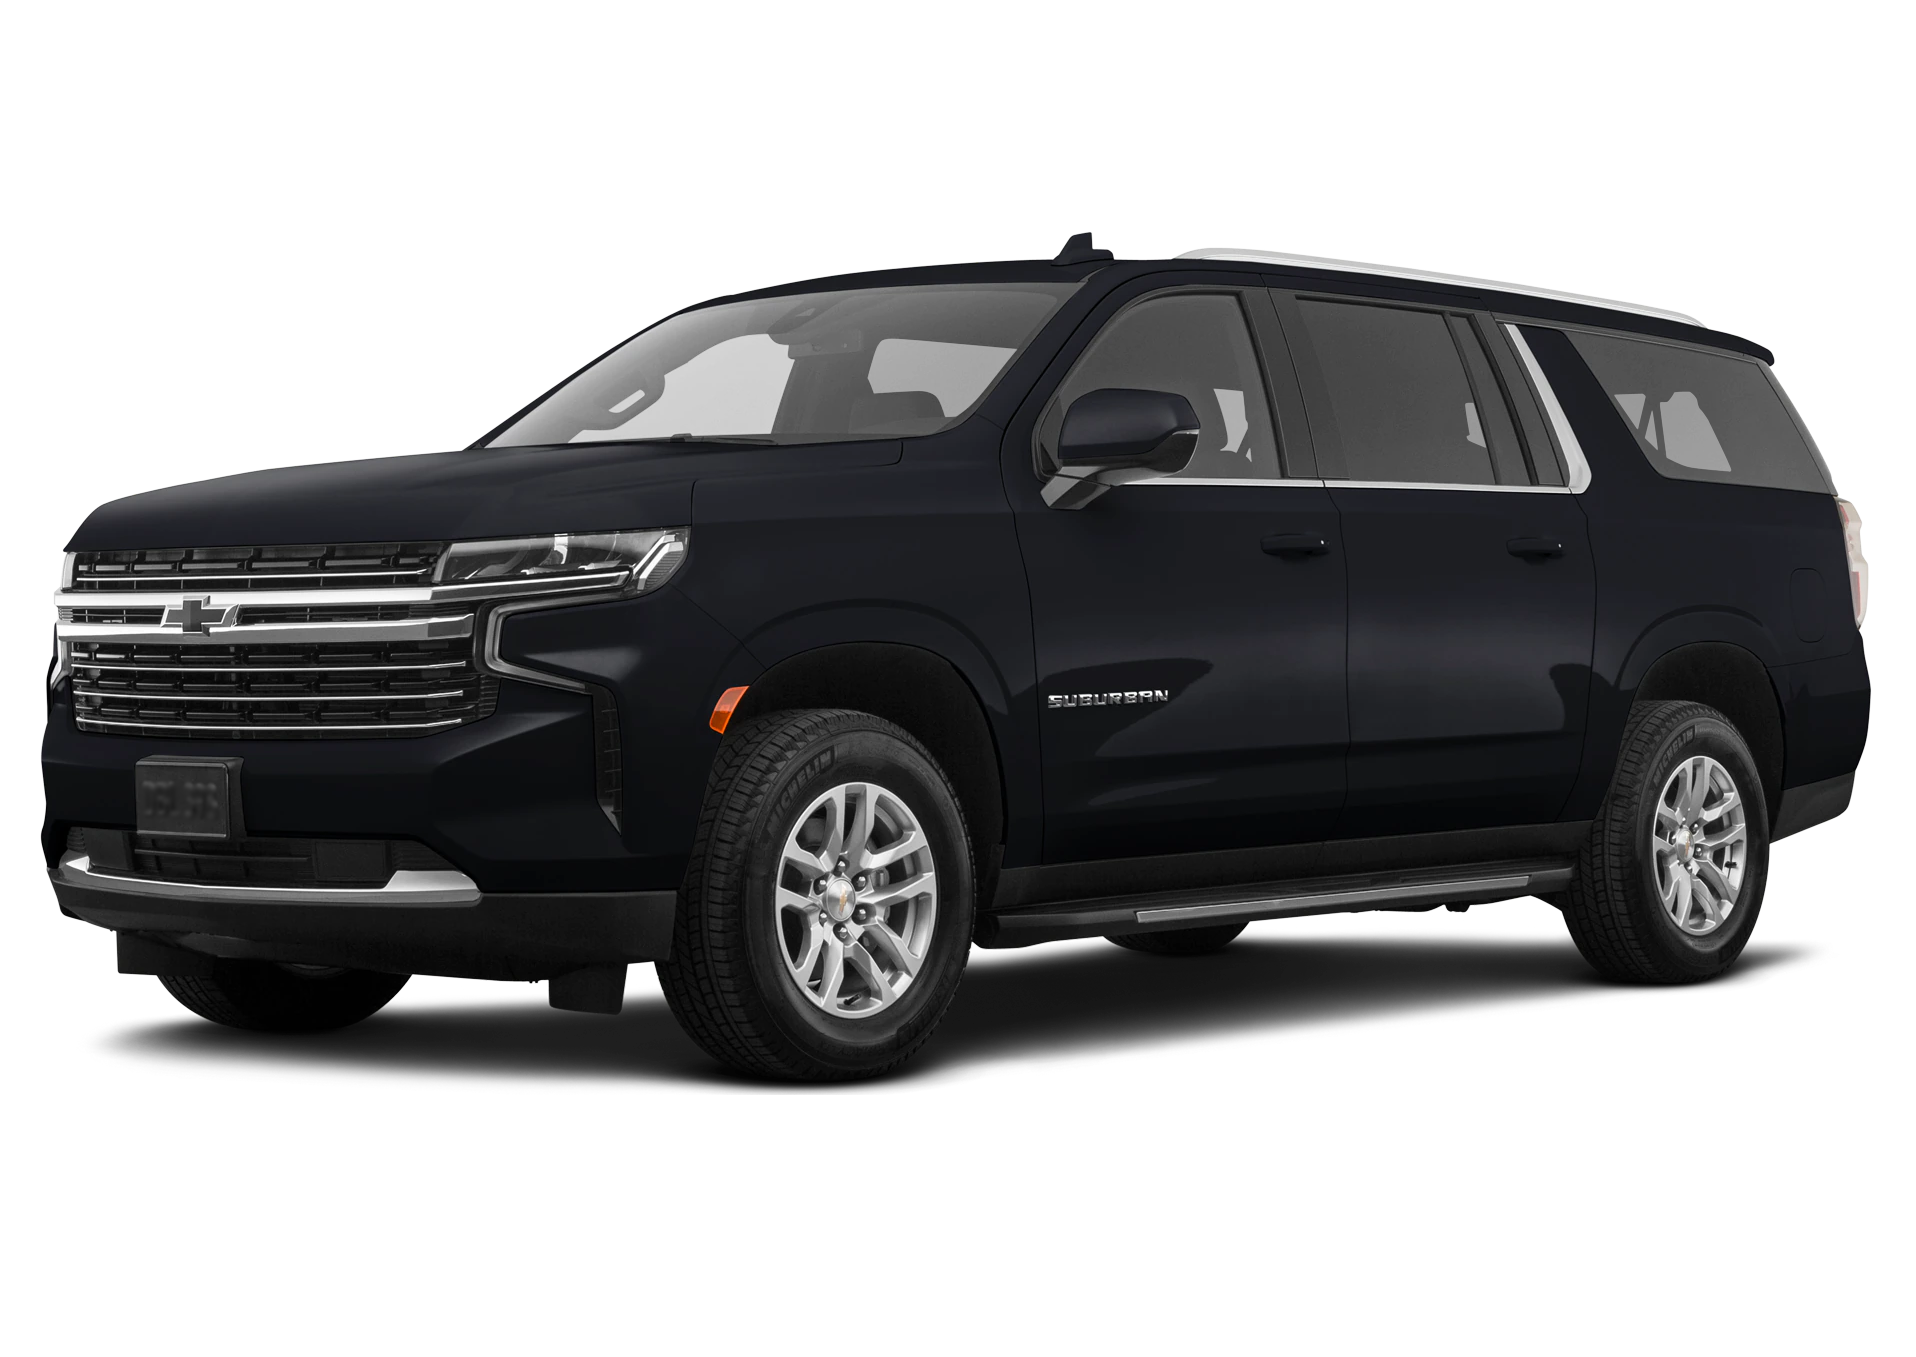 A black luxury SUV for airport transfer